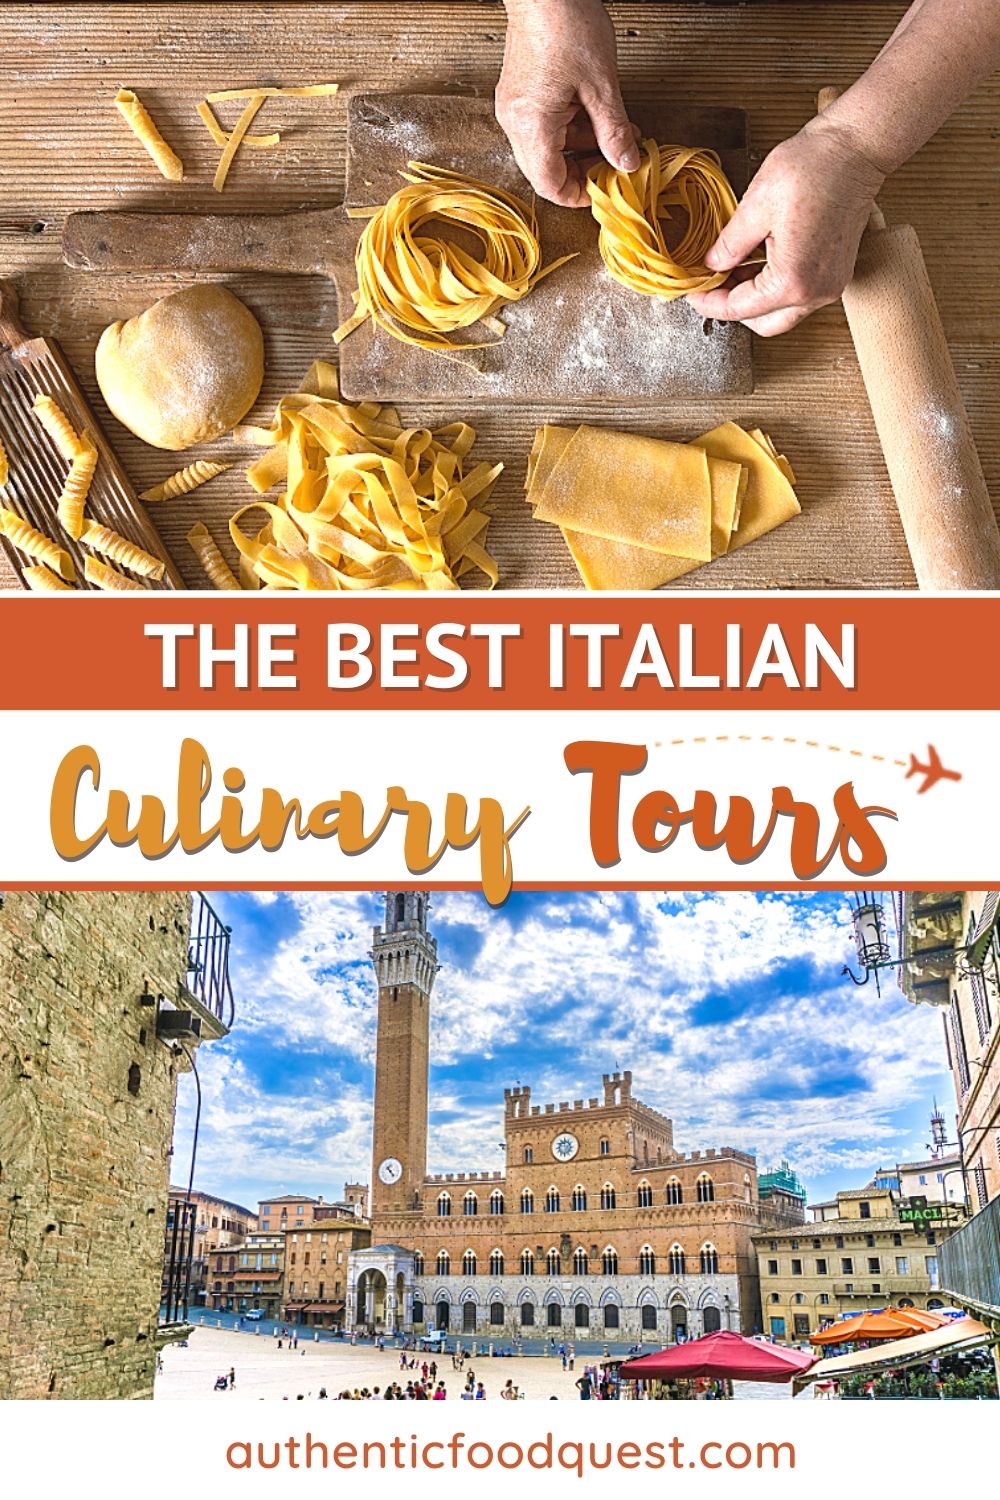 culinary trips to italy